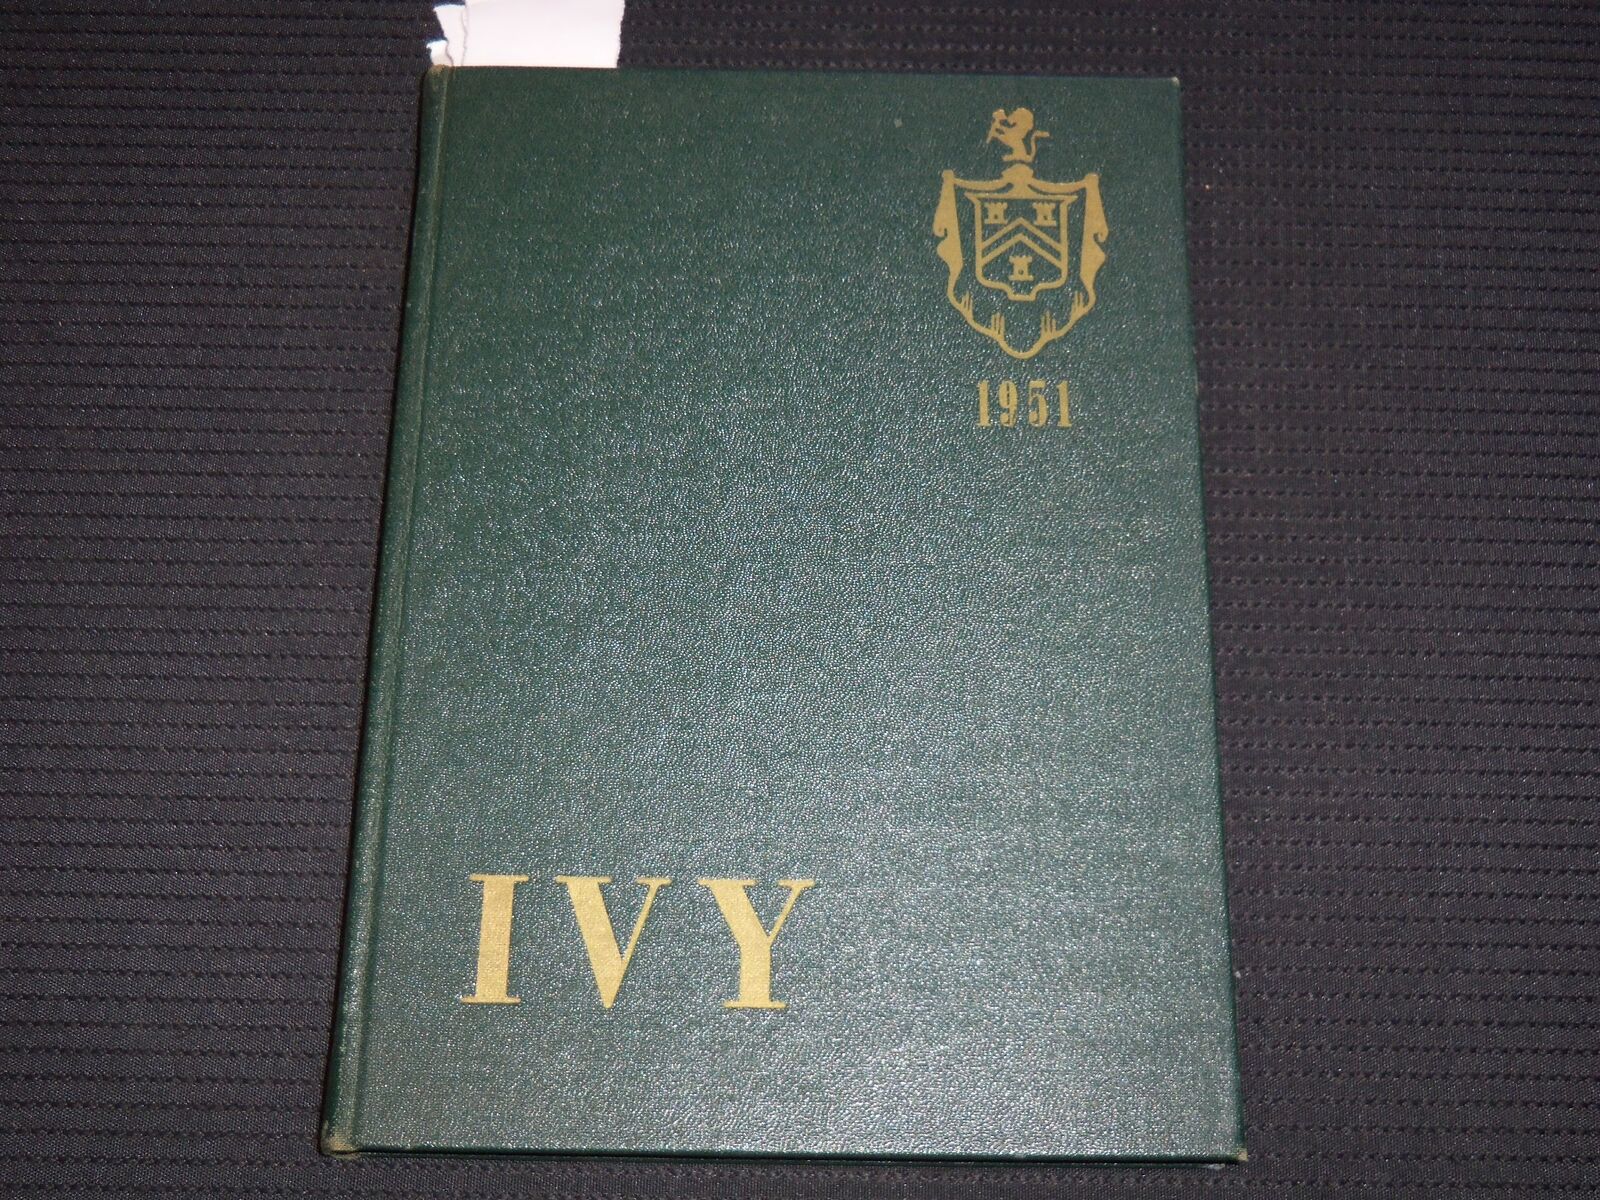 1951 THE IVY ST. MARY'S HALL YEARBOOK - BURLINGTON NEW JERSEY - KD 4144C